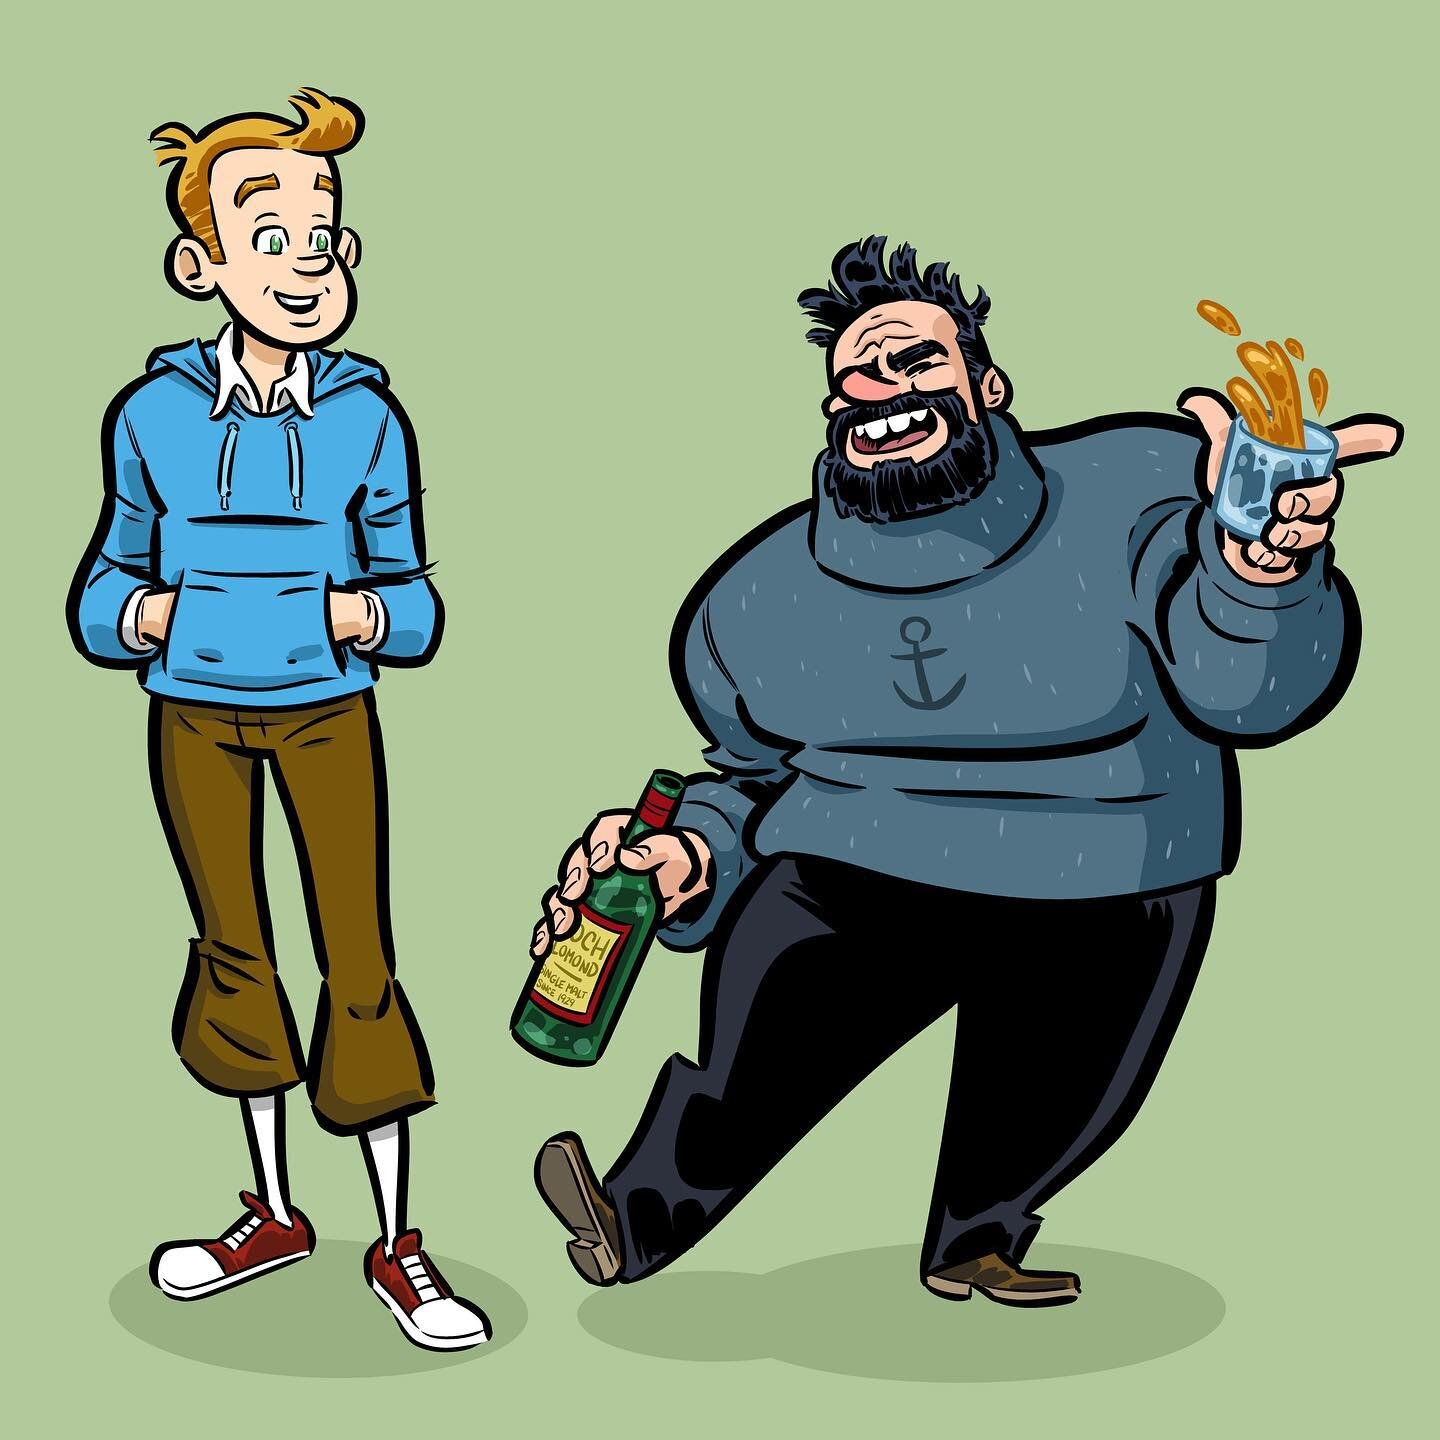 Happy, happy birthday, Herg&eacute;! Without you, the there wouldn&rsquo;t be a comic character haircut for my barber to copy. (Swipe to see just how accurate this is!)

I drew these semi-modernized Tintin and Haddock last year, but I love &lsquo;em&